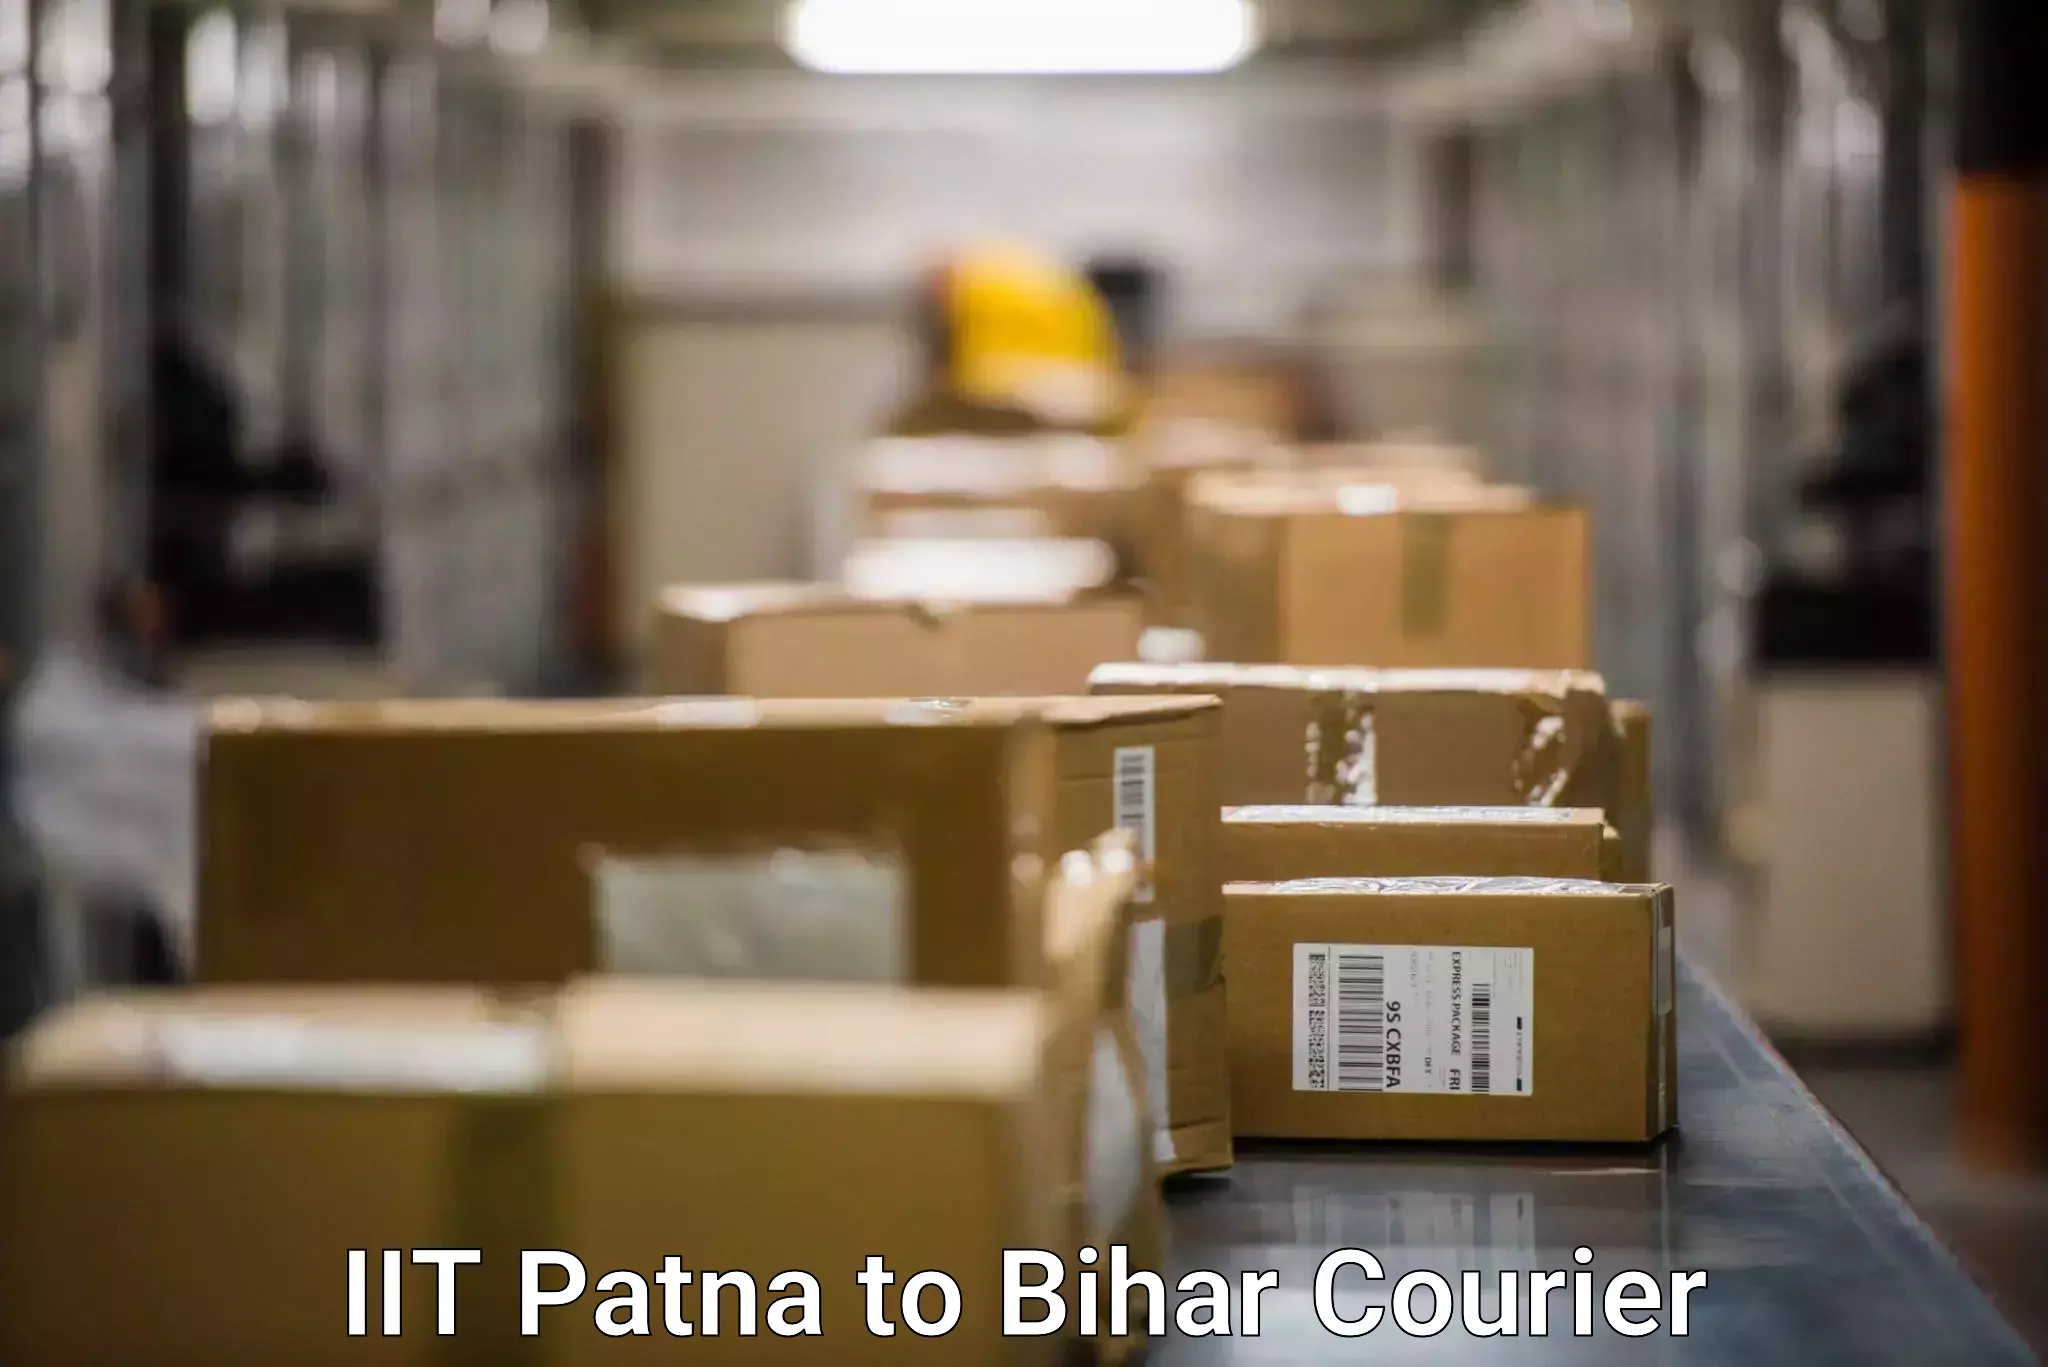 On-call courier service IIT Patna to Rajpur